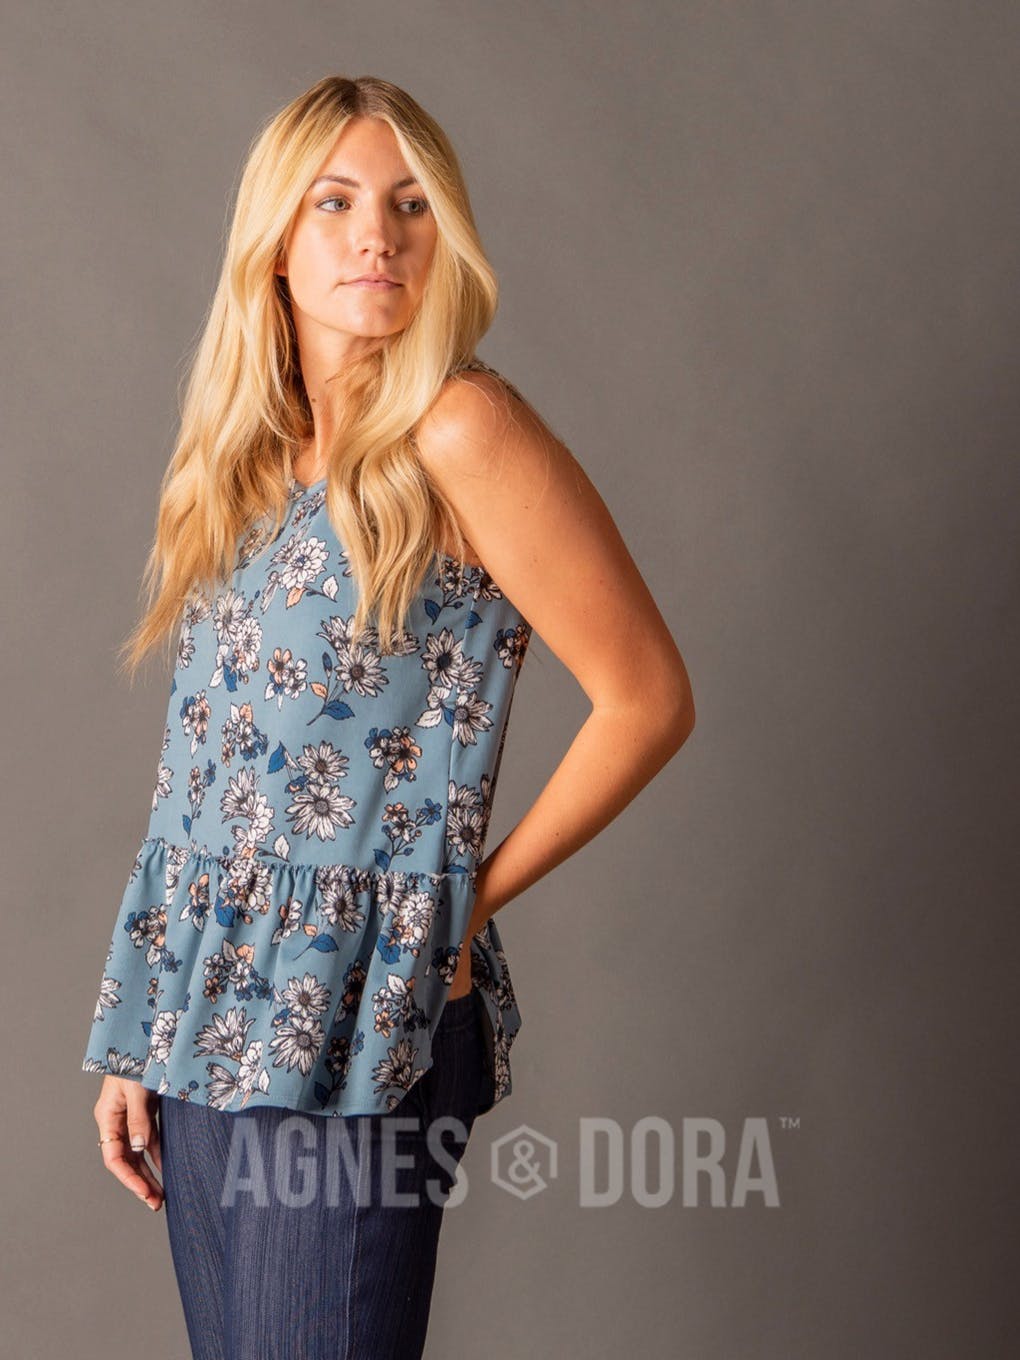 Agnes & Dora™ Relaxed Ruffle Tank Chambray/Blush Floral